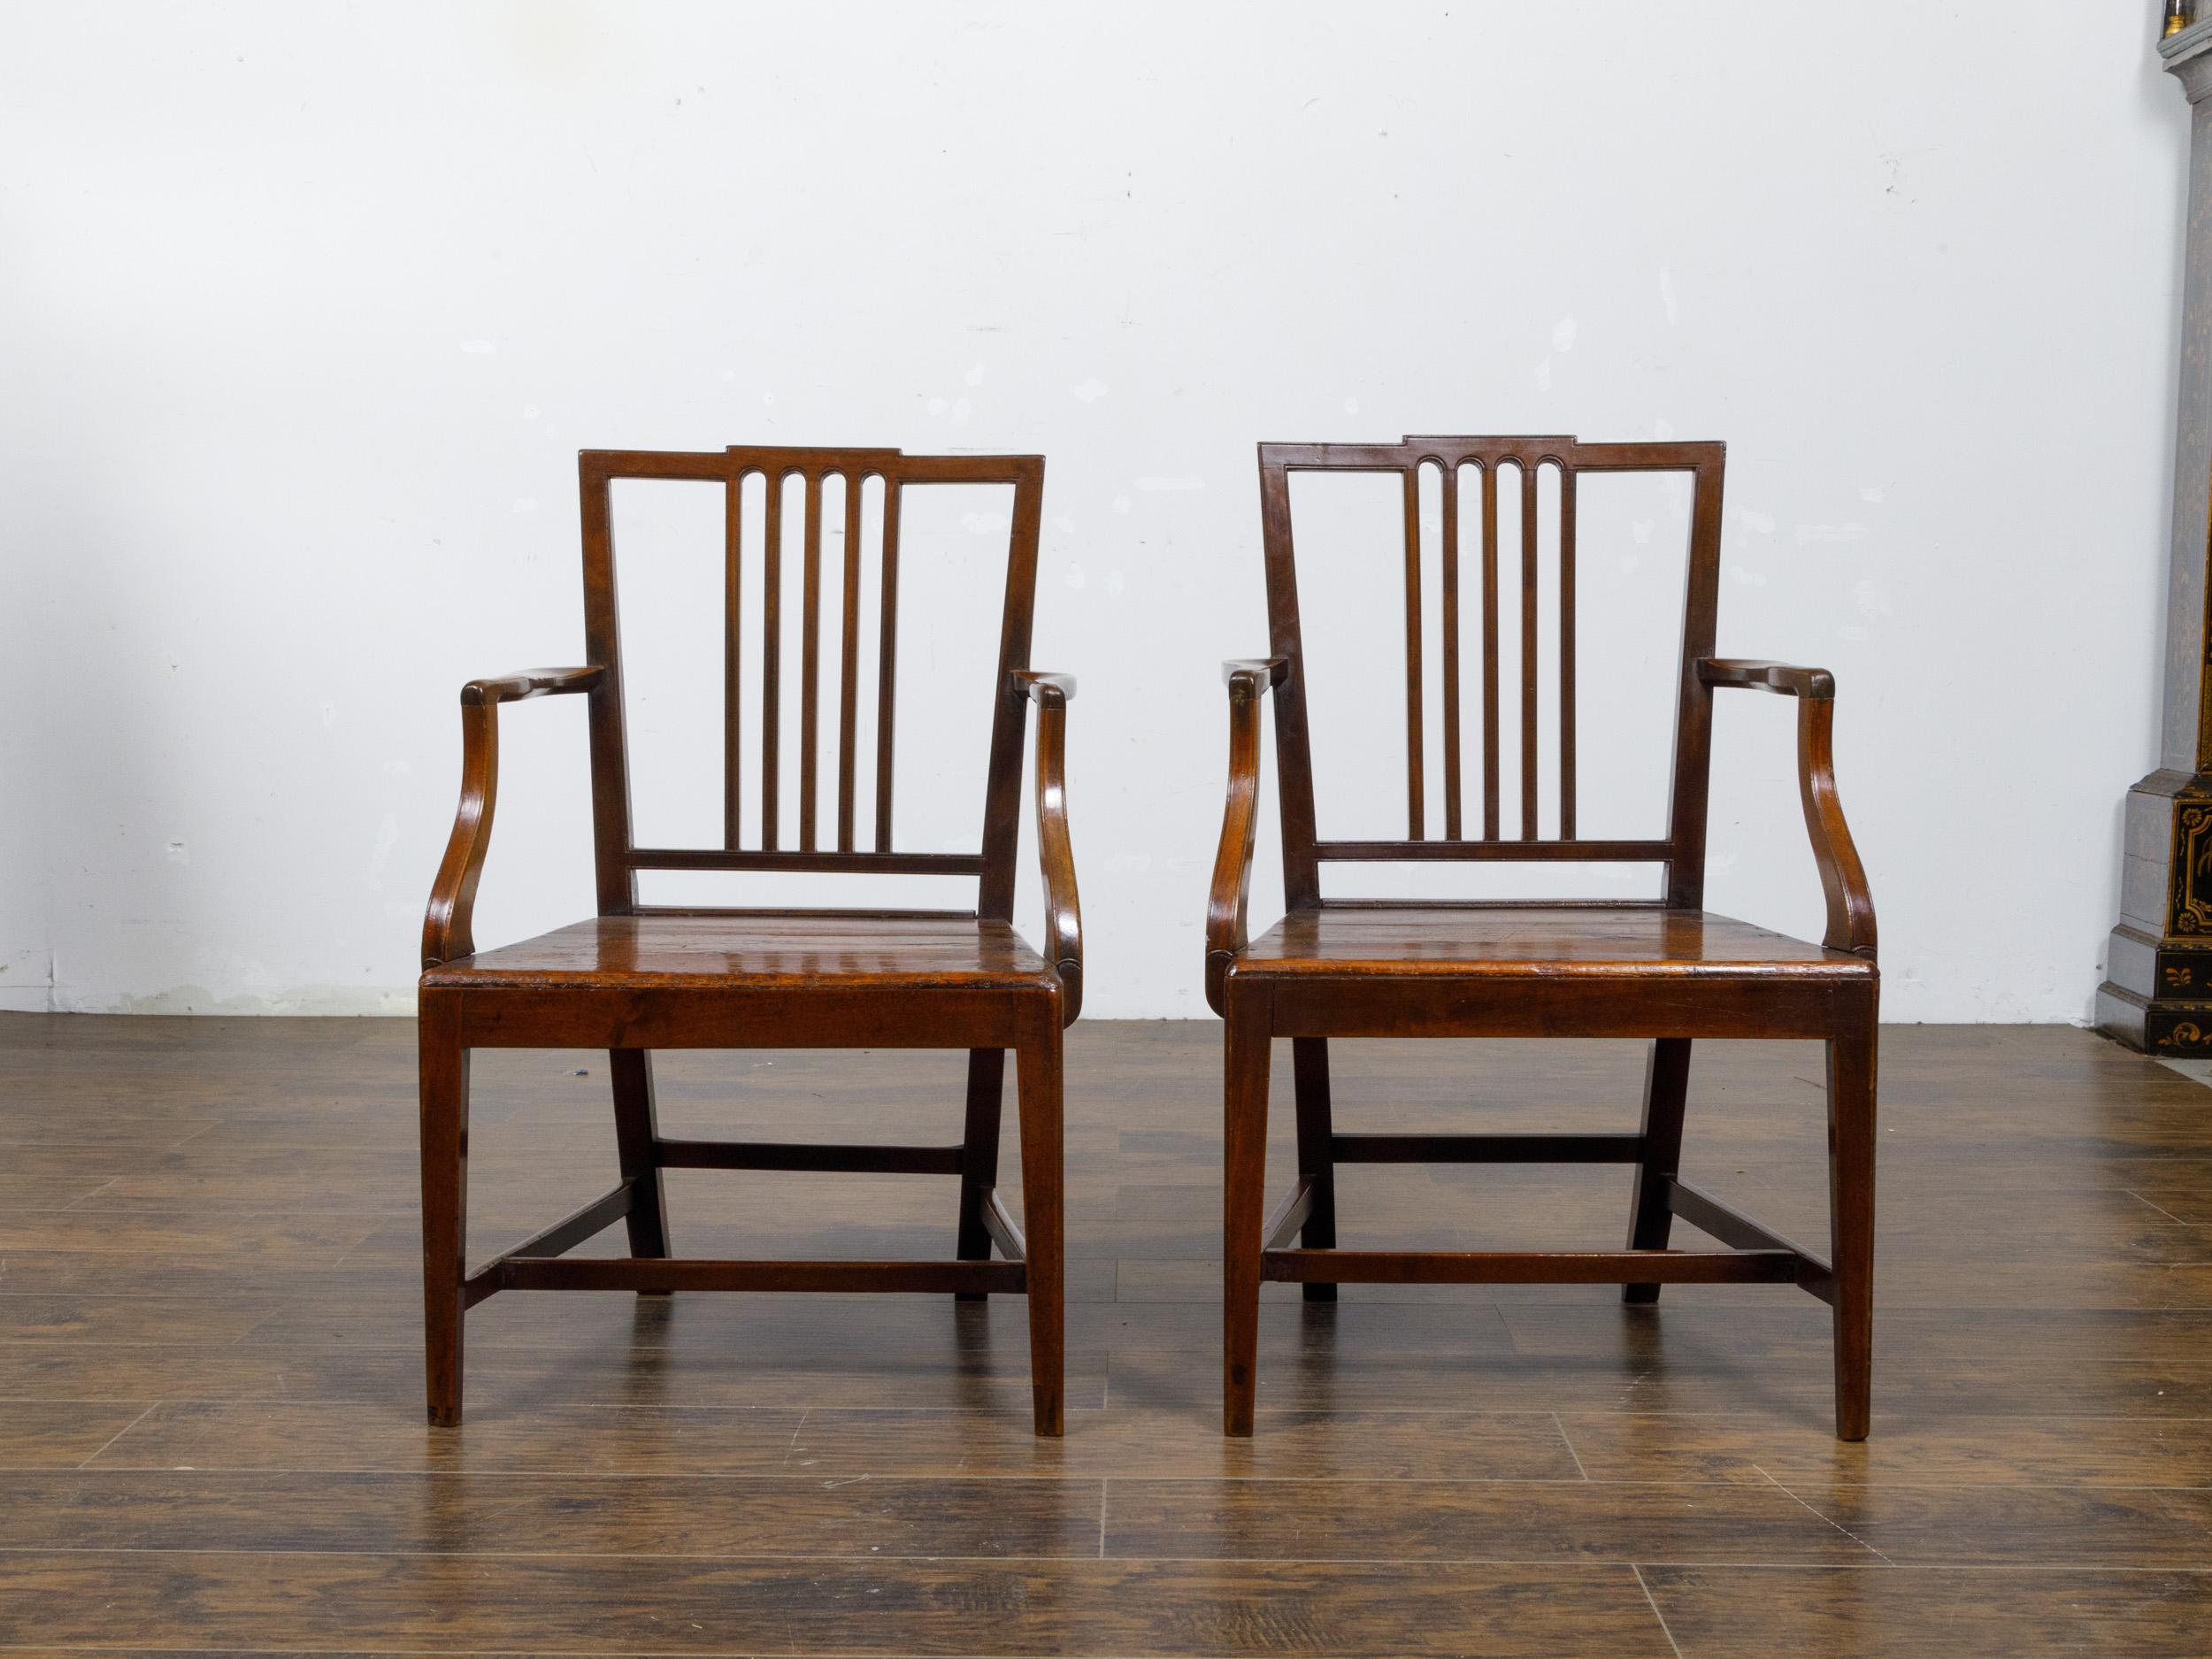 Pair of English Early 19th Century Plank Seat Chairs with Scrolling Arms For Sale 5